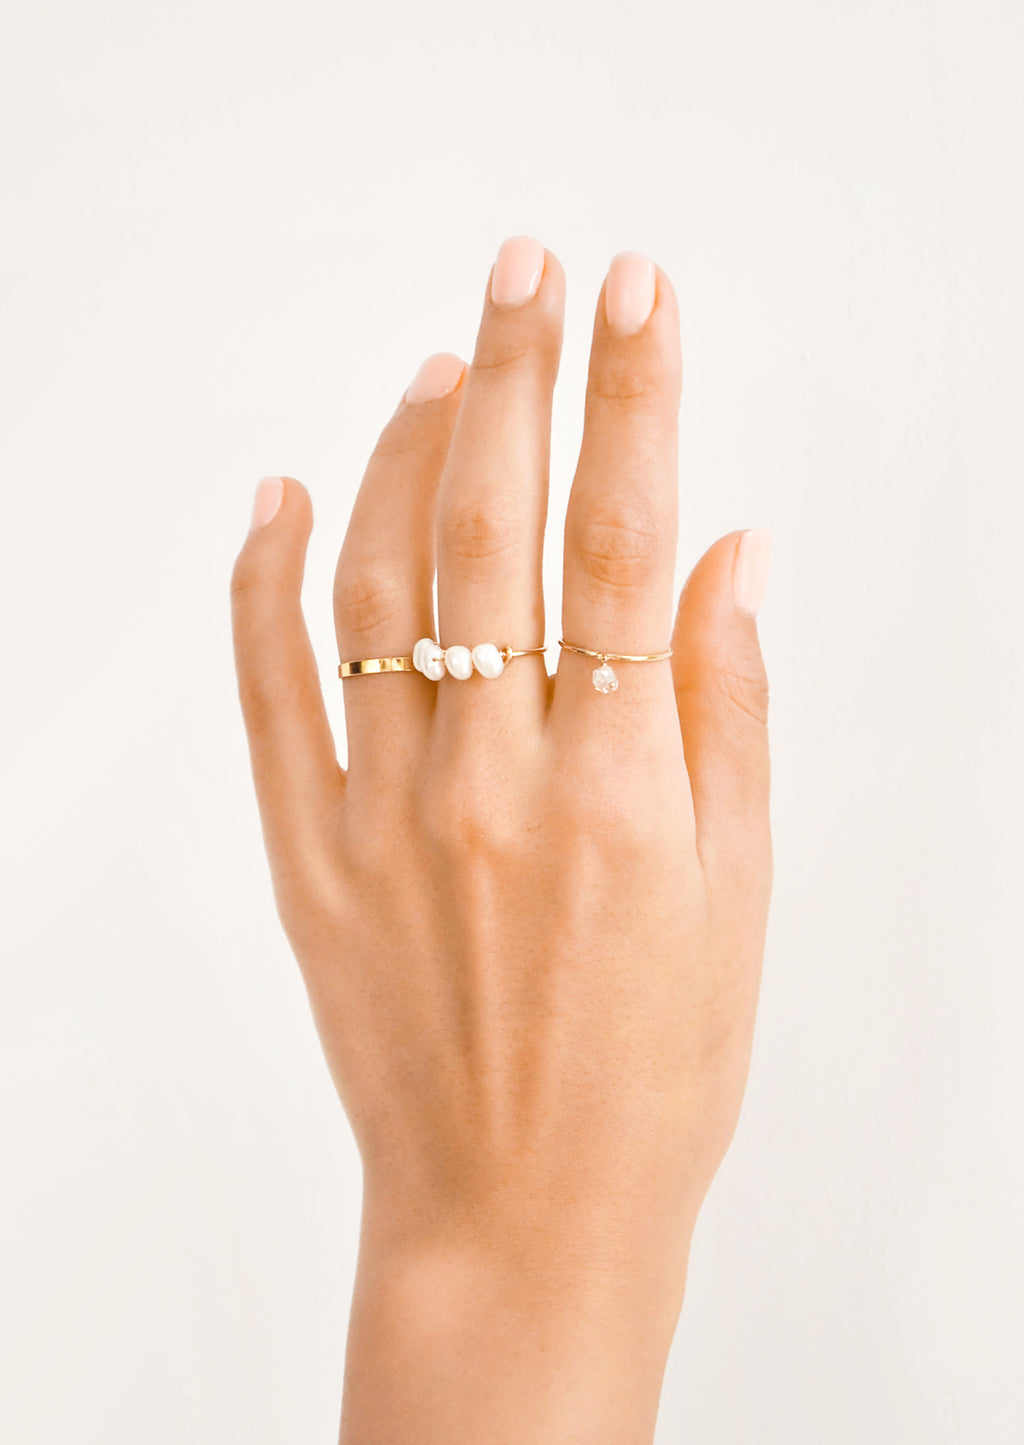 2: Model shot showing hand with several gold rings.